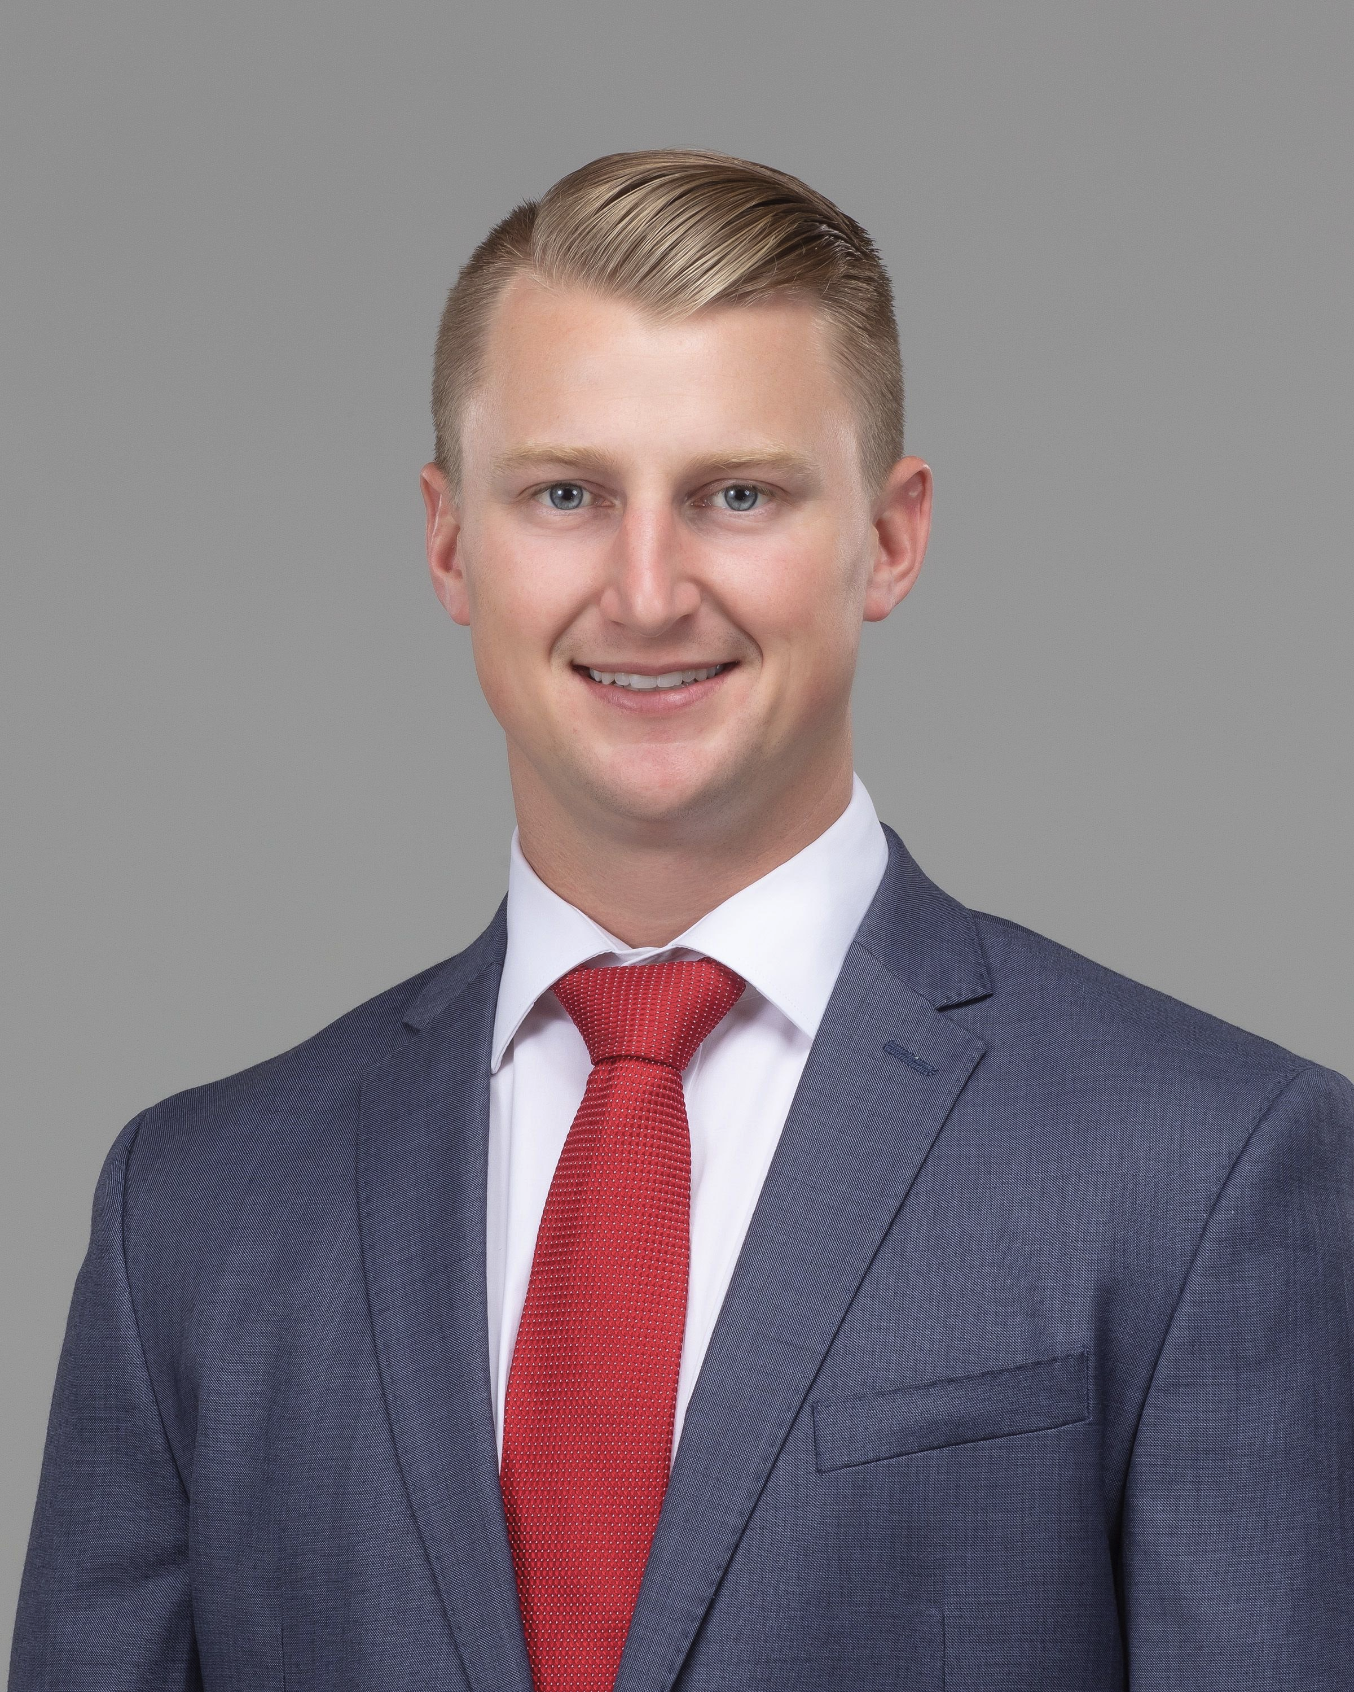 Andrew D. Moody of Moody Law, P.A. | Bartow, FL